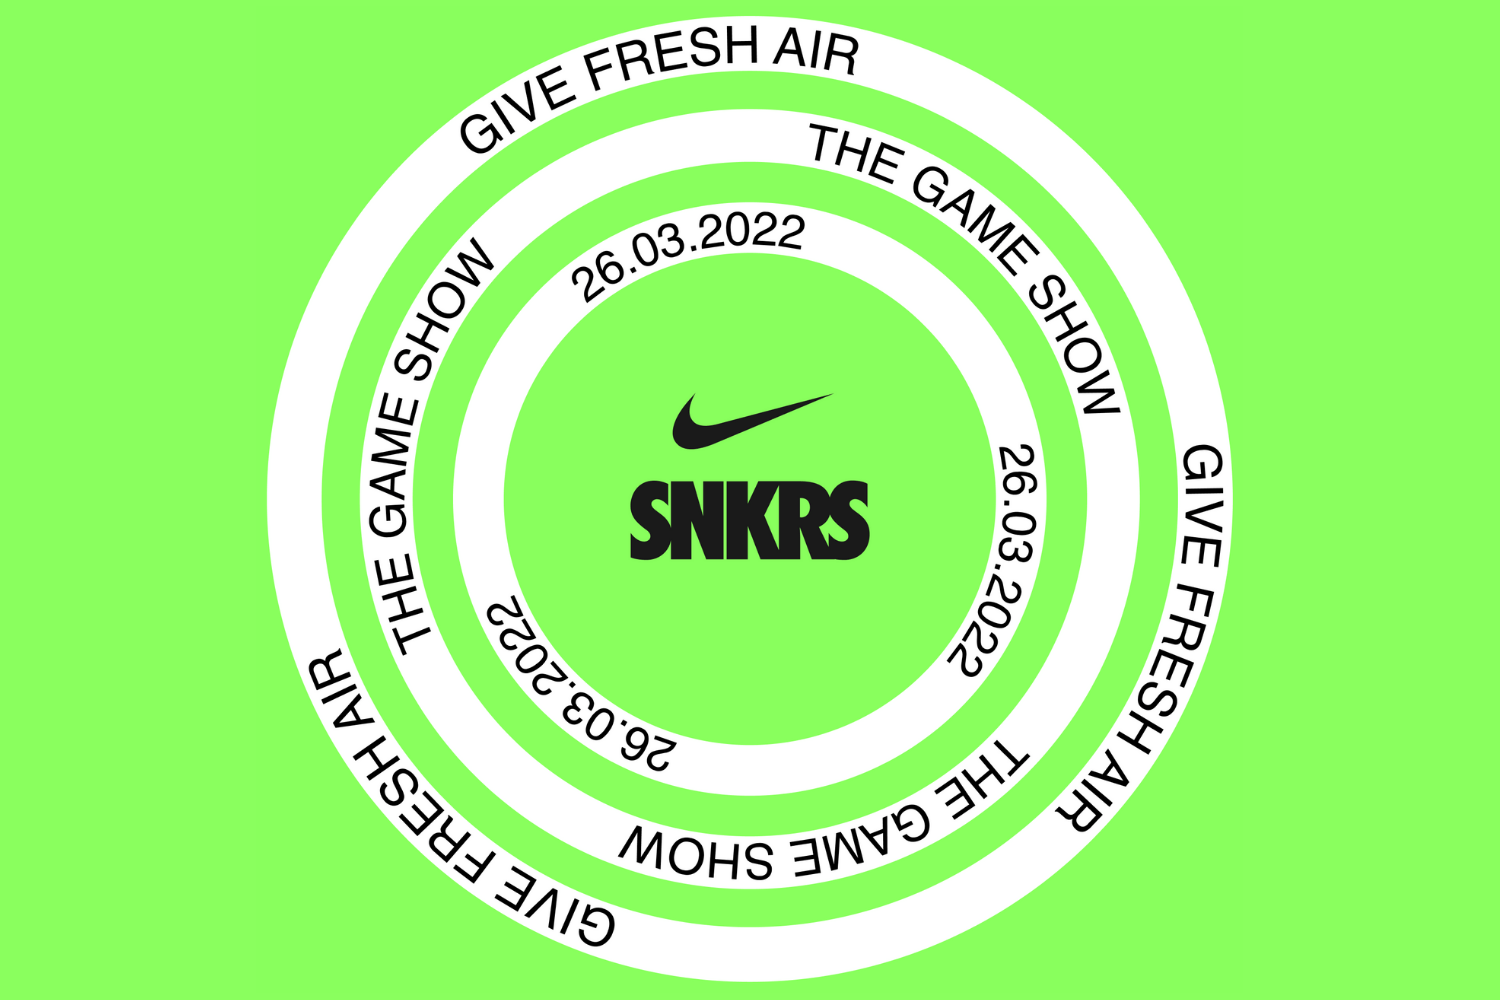 Nike Give Fresh Air: The Game Show during Air Max Day